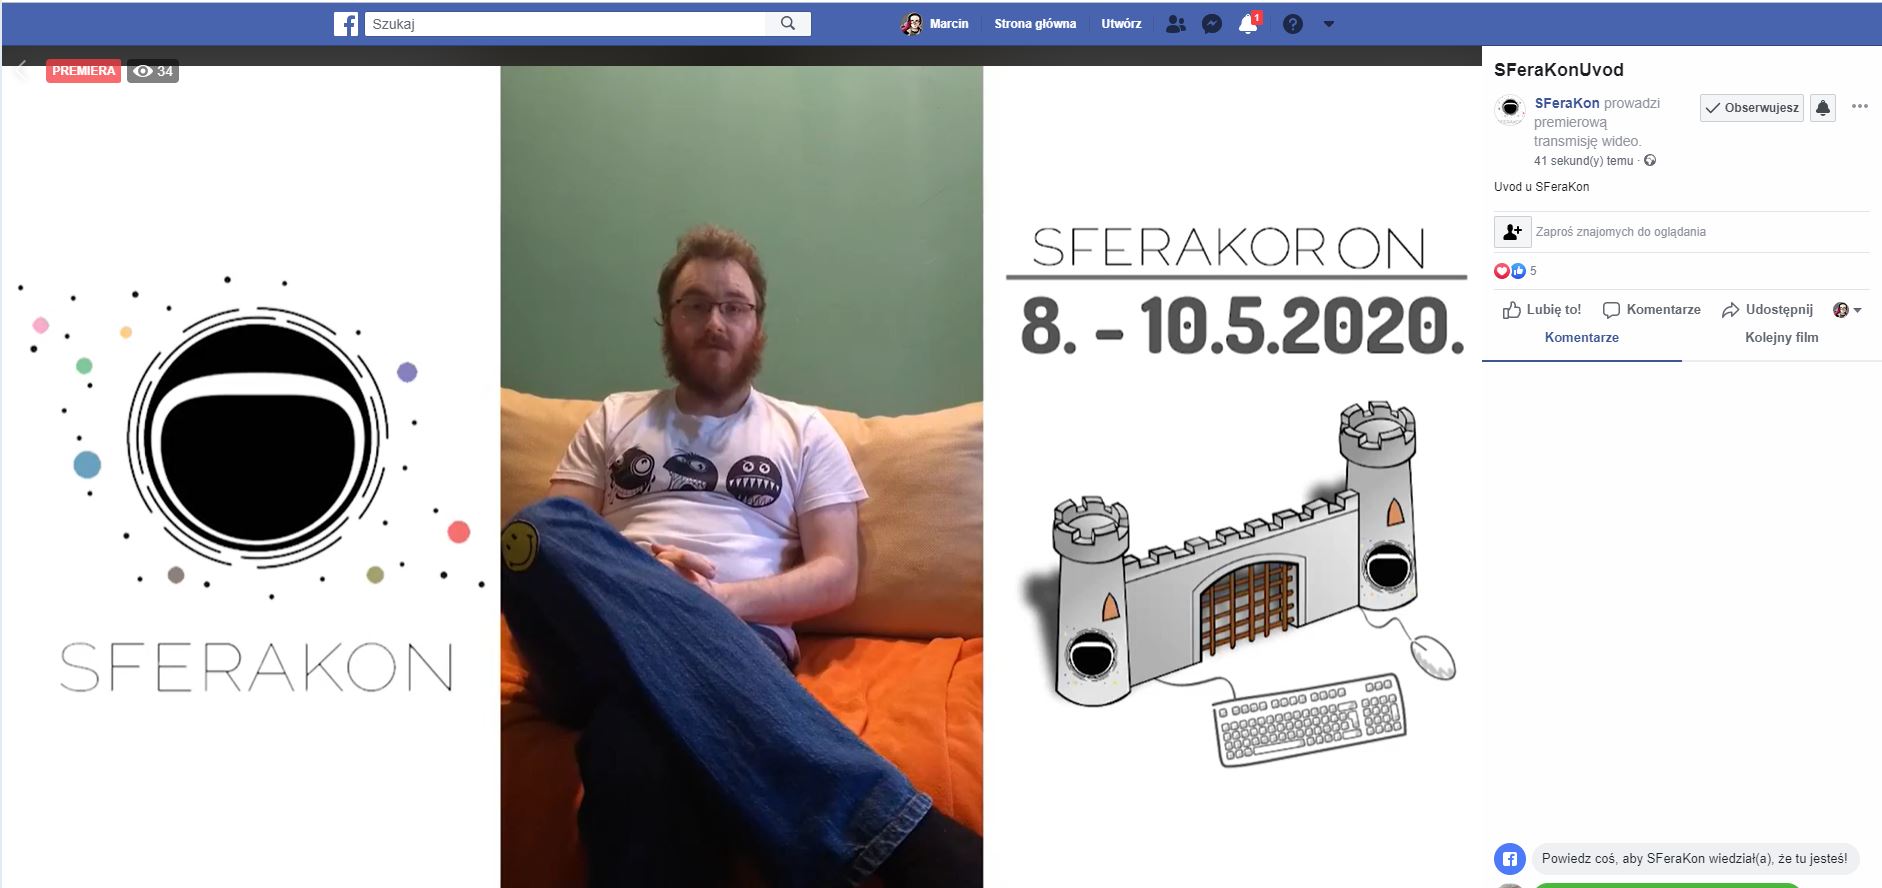 Screenshot from facebook live stream. On the left there is astronaut's helmet and SFERAKON name, in the middle there is a man sitting on the couch. To the right there is convention name and date and below picture of city wall with keyboard connected to it. Lastly there is facebook chat visible.